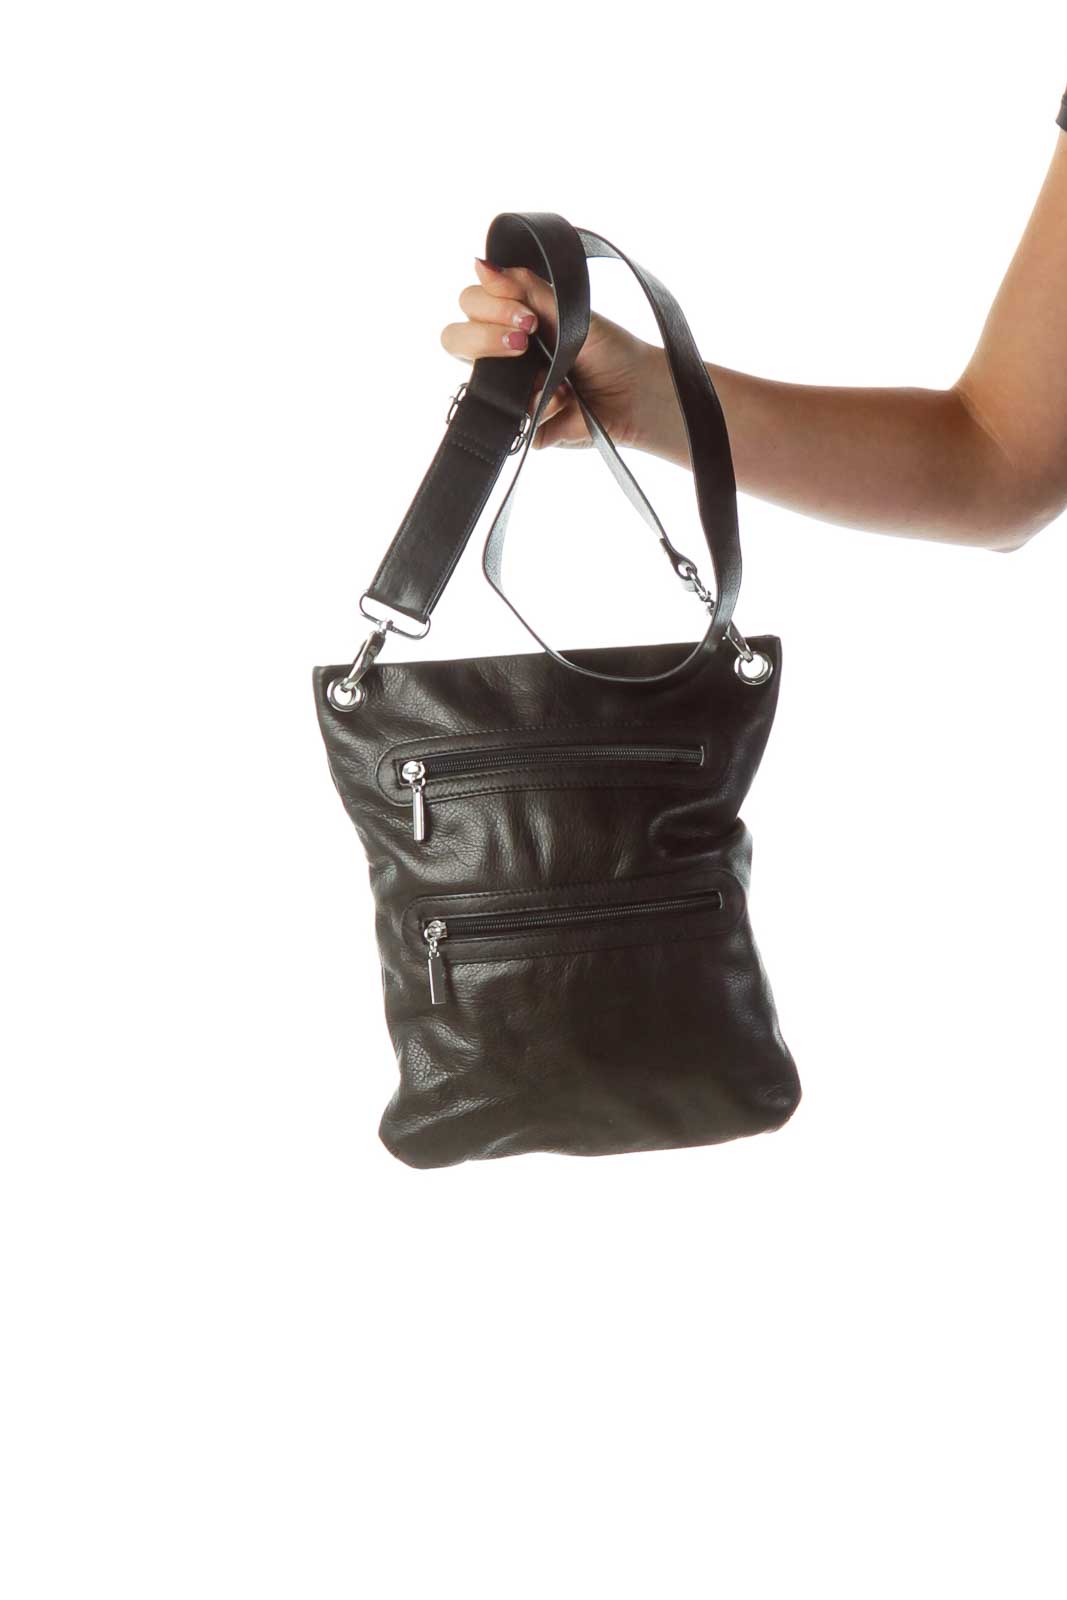 Black Leather Pocketed Cross Body Bag Front